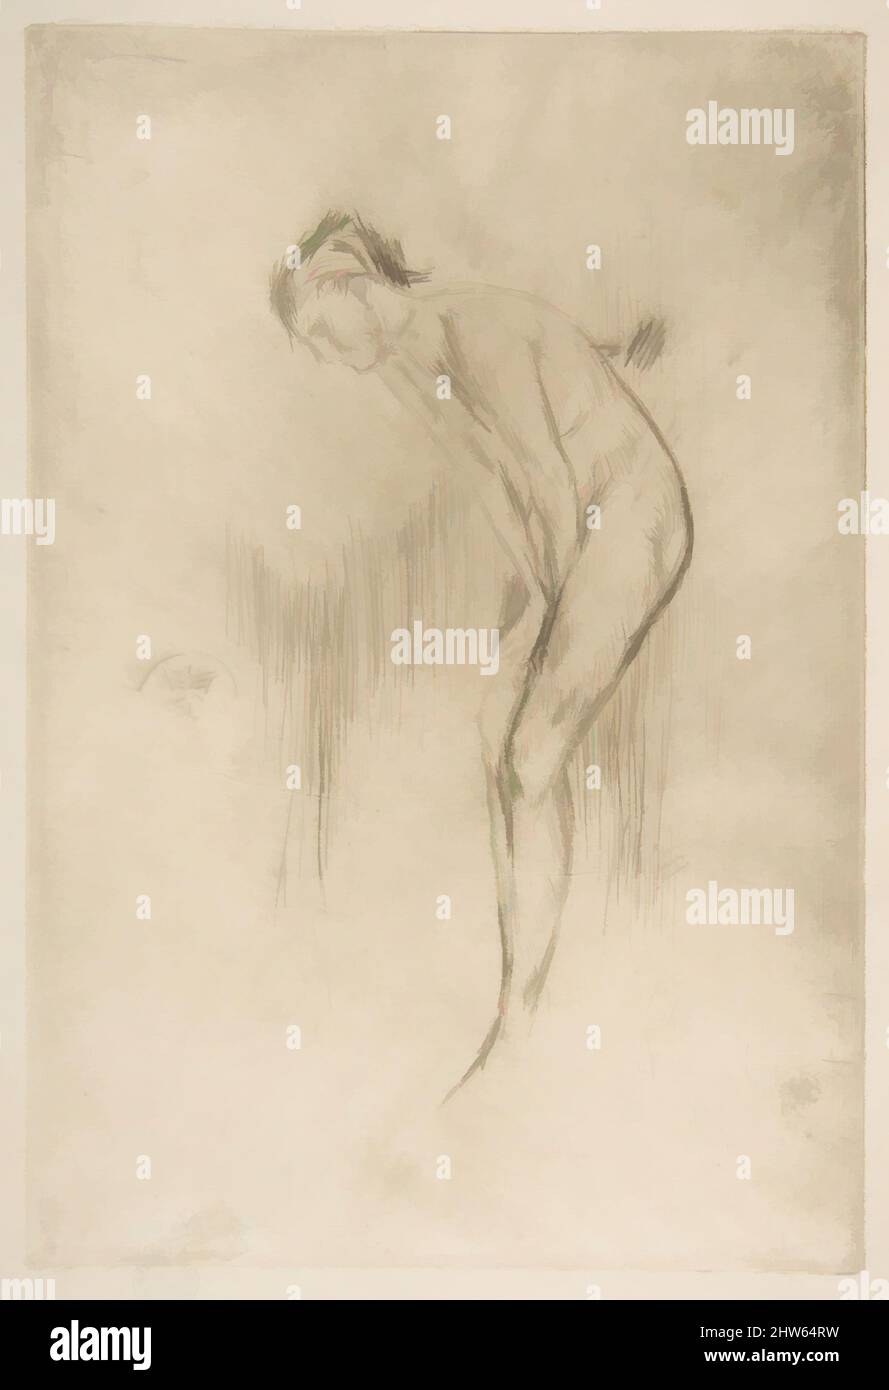 Art inspired by Tillie: a Model (Tillie Gilchrist), 1873, Drypoint; third state of five (Glasgow); printed in black ink on ivory laid paper, Plate: 9 3/16 × 6 1/4 in. (23.4 × 15.9 cm), Prints, James McNeill Whistler (American, Lowell, Massachusetts 1834–1903 London, Classic works modernized by Artotop with a splash of modernity. Shapes, color and value, eye-catching visual impact on art. Emotions through freedom of artworks in a contemporary way. A timeless message pursuing a wildly creative new direction. Artists turning to the digital medium and creating the Artotop NFT Stock Photo